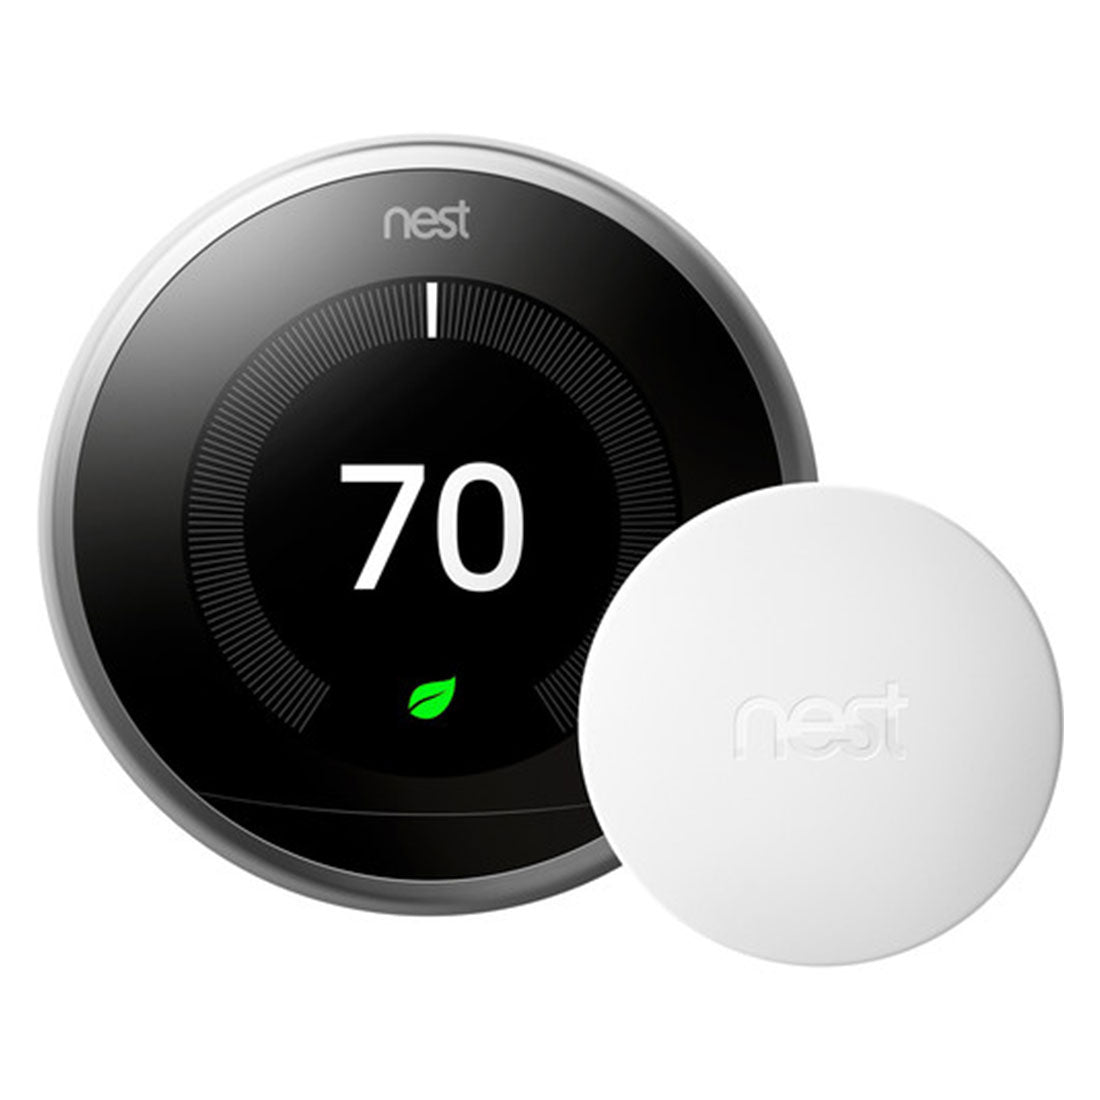 Nest T5001SF thermostat